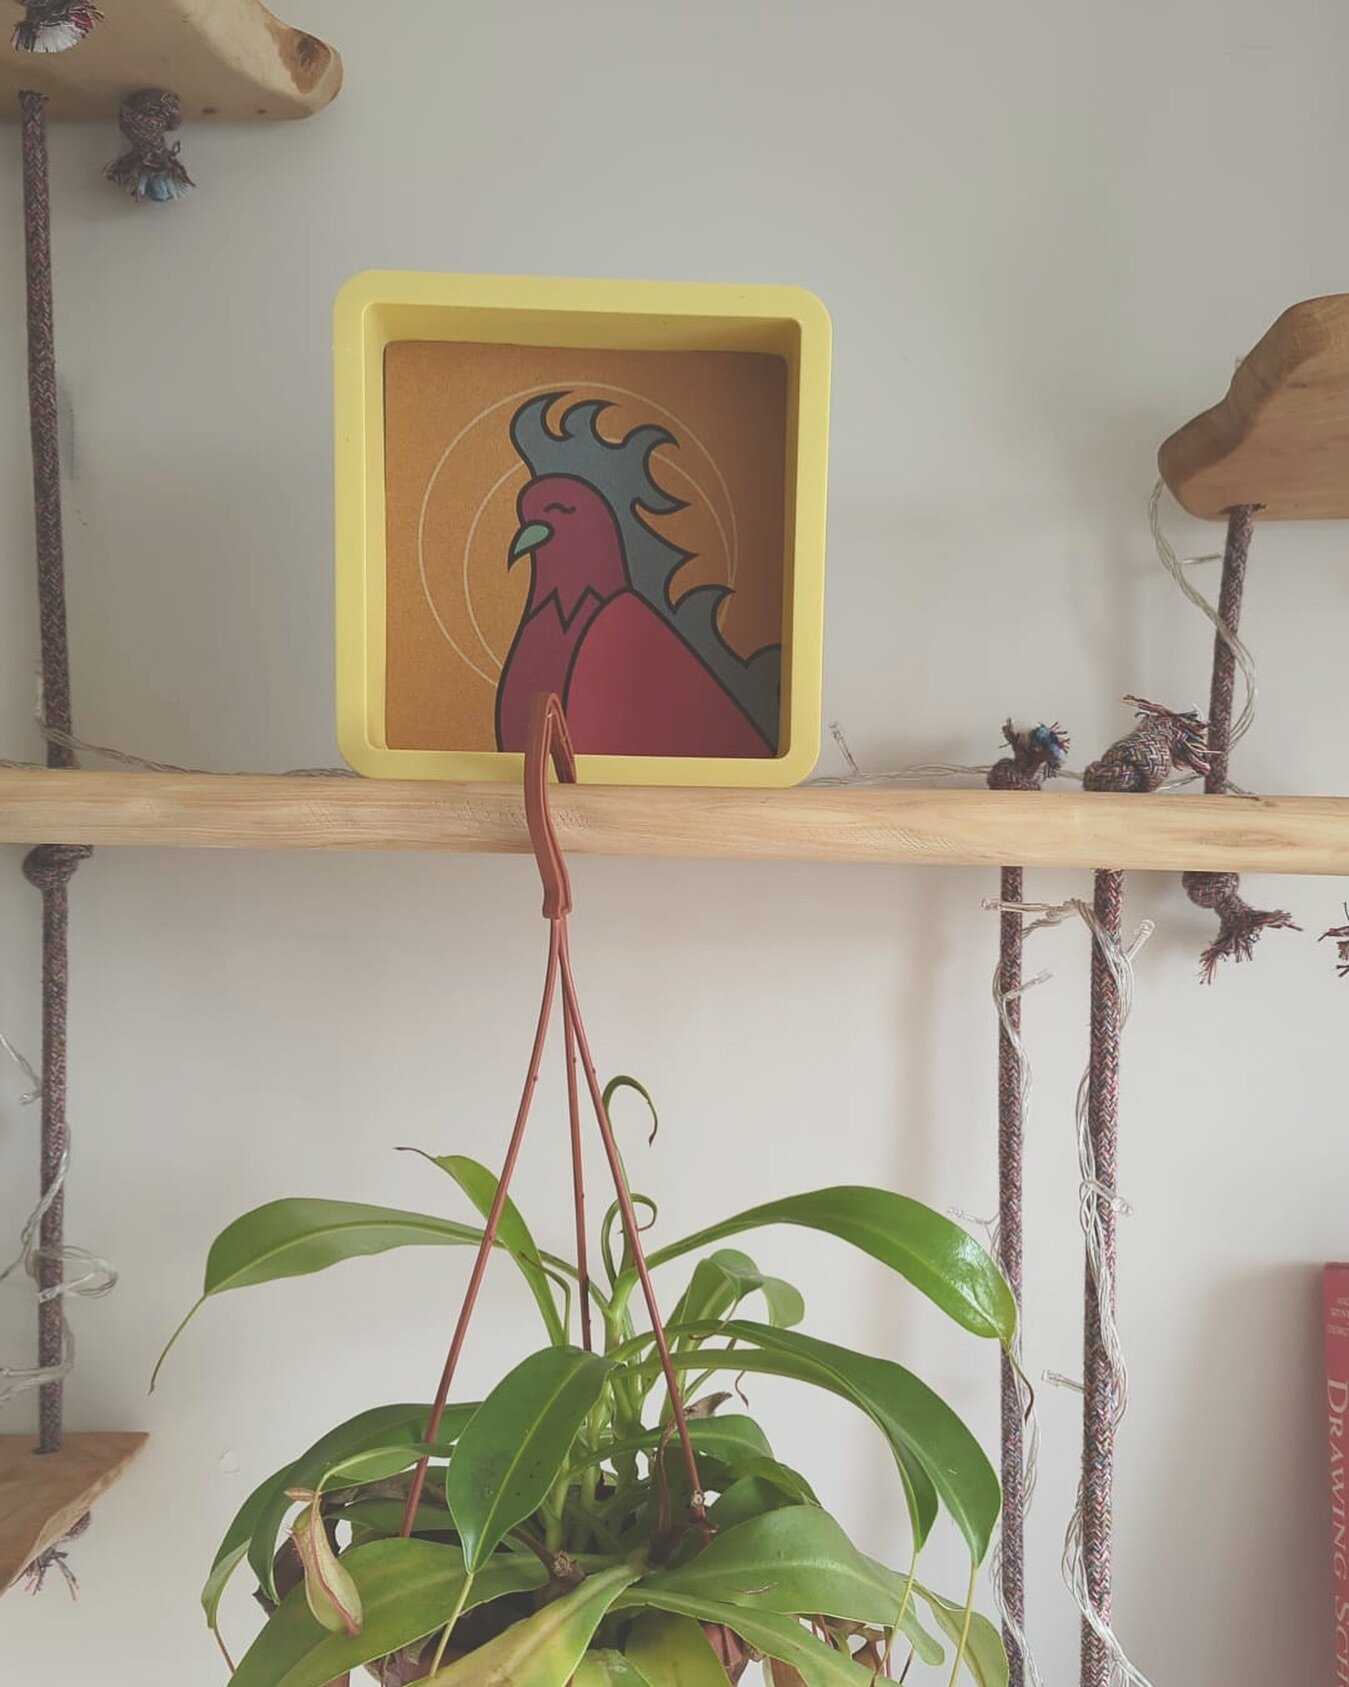 &ldquo;Thank you again for my first piece of art ..I absolutely love it! ❤️&rdquo; 

🥰🕊️🔥

@purvezamirali&rsquo;s first art 🖼️ for his new home in Luz